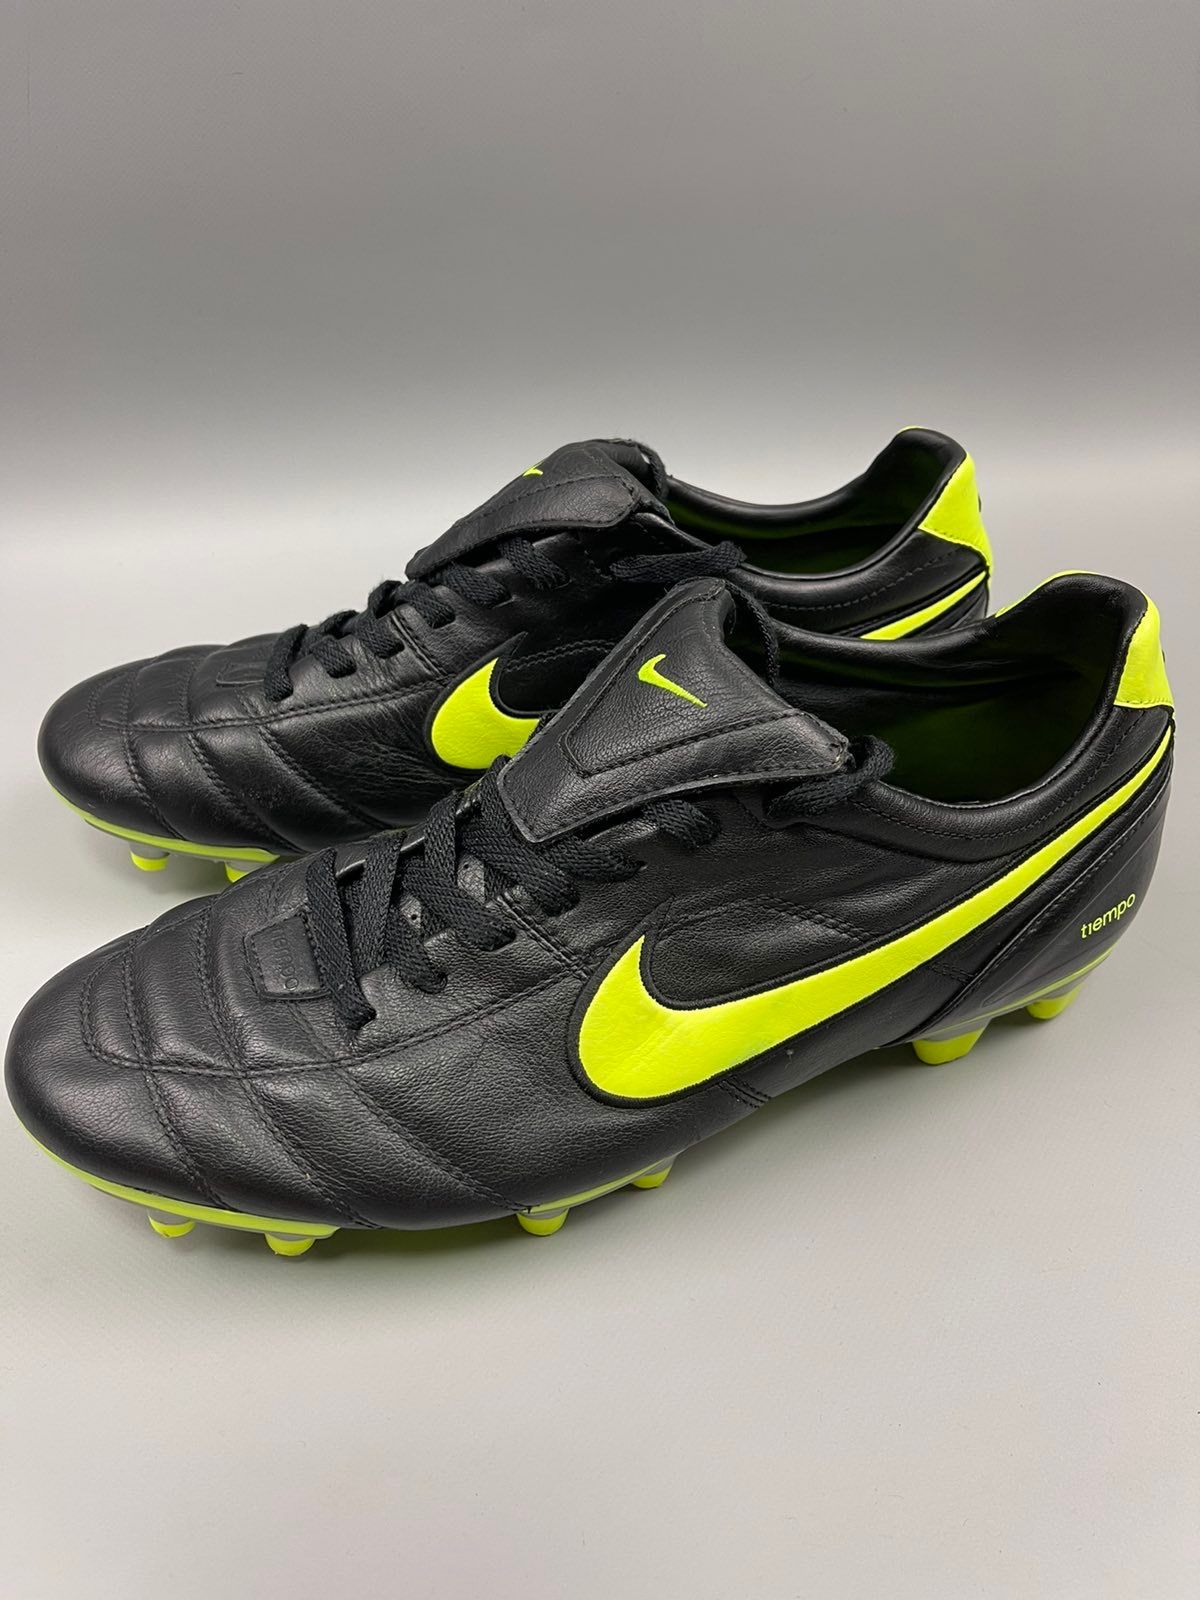 Pre-owned Nike Tiempo Legend 2 Fg Pro Black Boots Football Size 10.5us